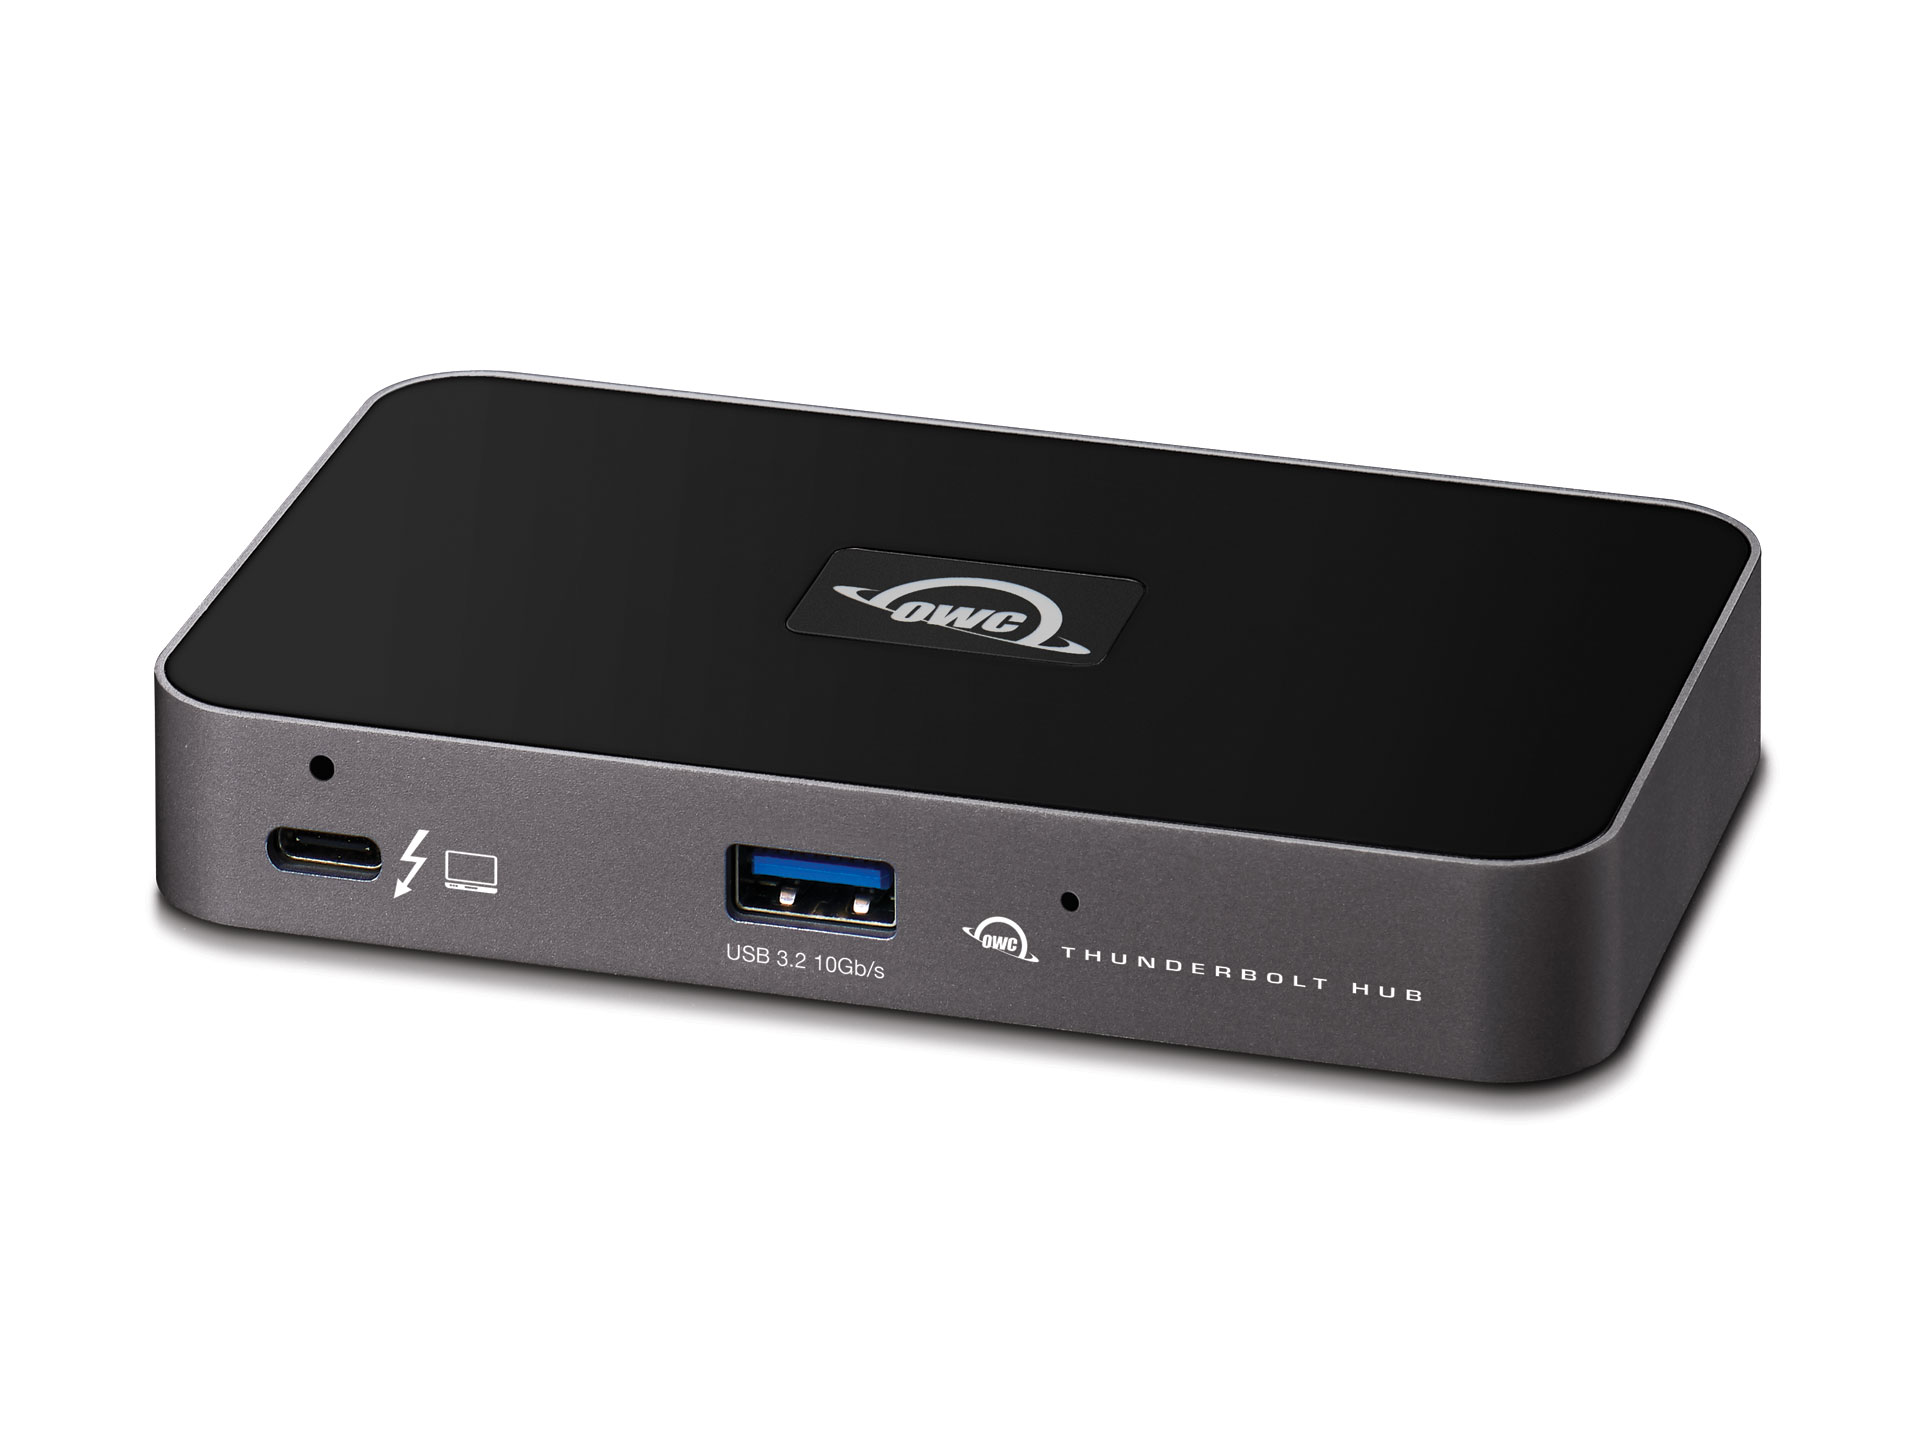 OWC Thunderbolt Hub for M1 Mac, Thunderbolt 3 equipped Mac, and